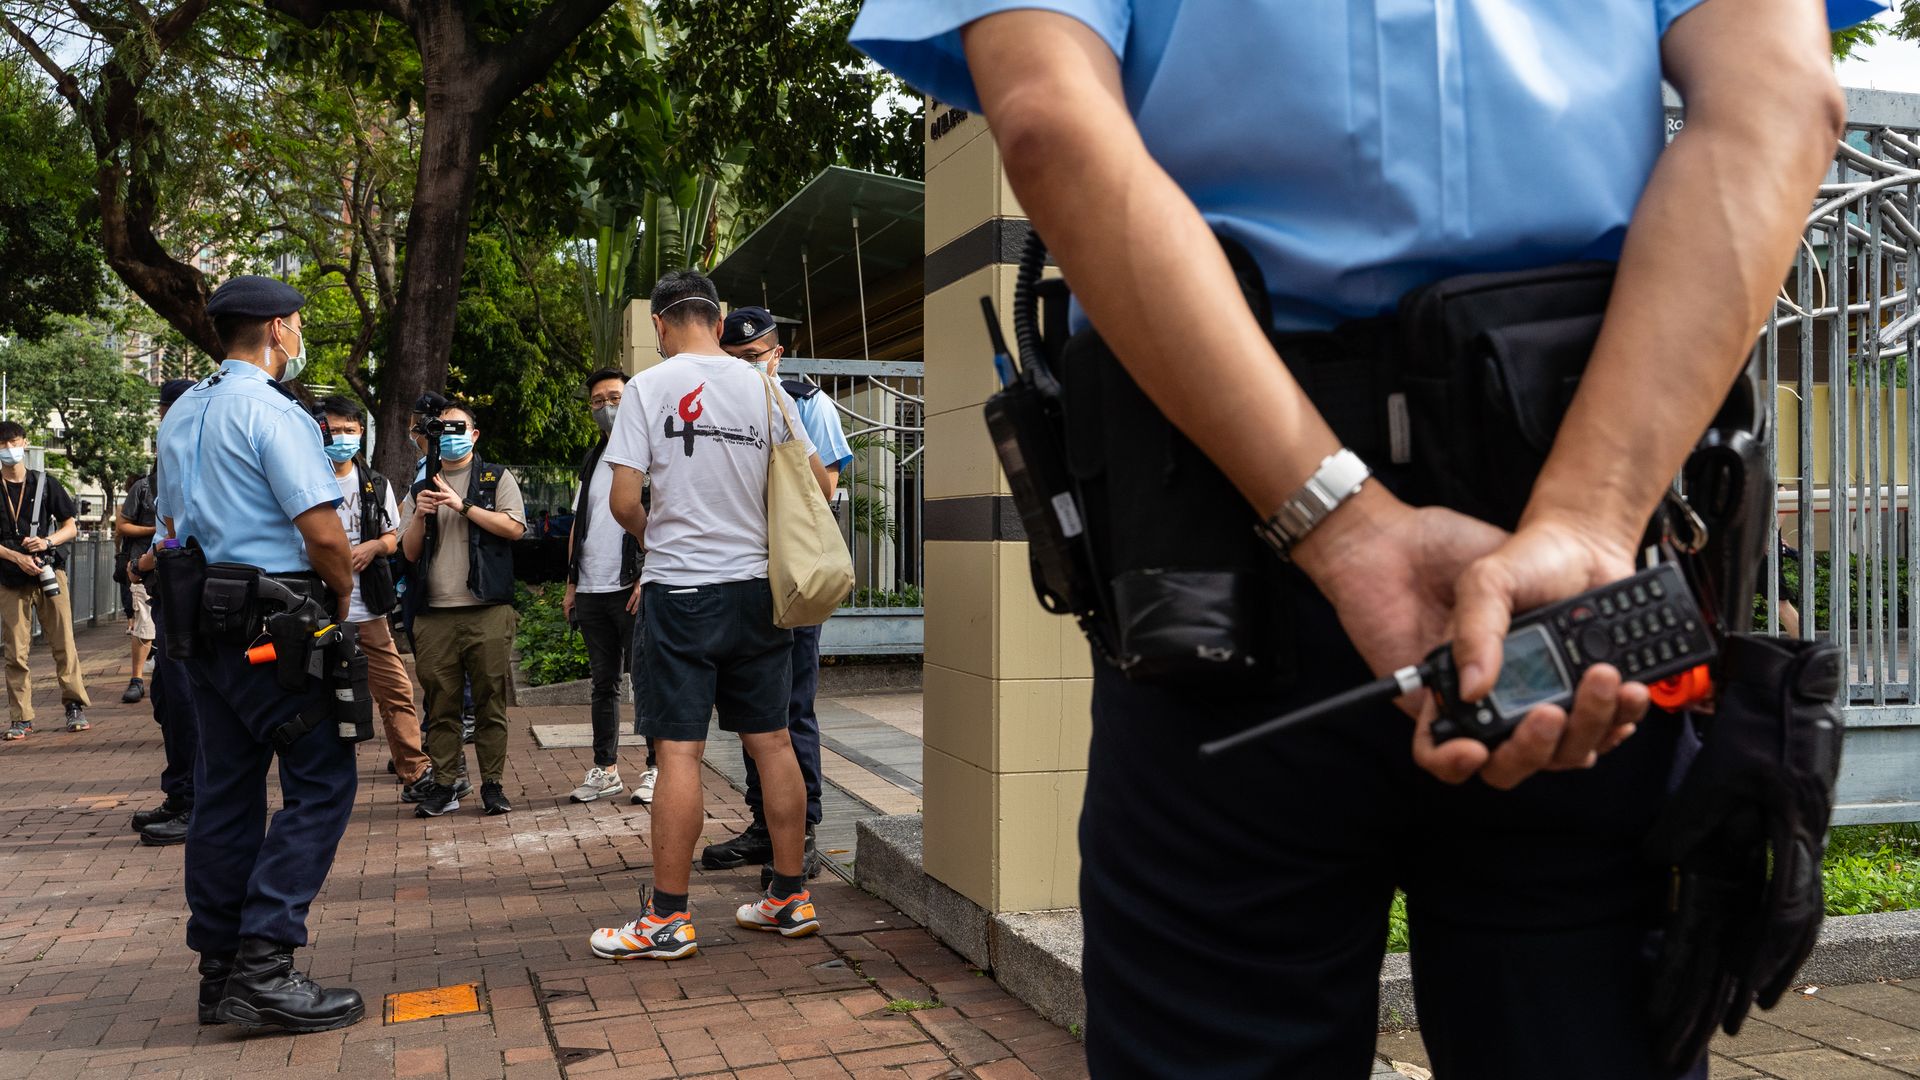 Hong Kong police searching a man on June 4 at Victoria Park, where the annual Tiananmen candlelight vigil normally takes place.